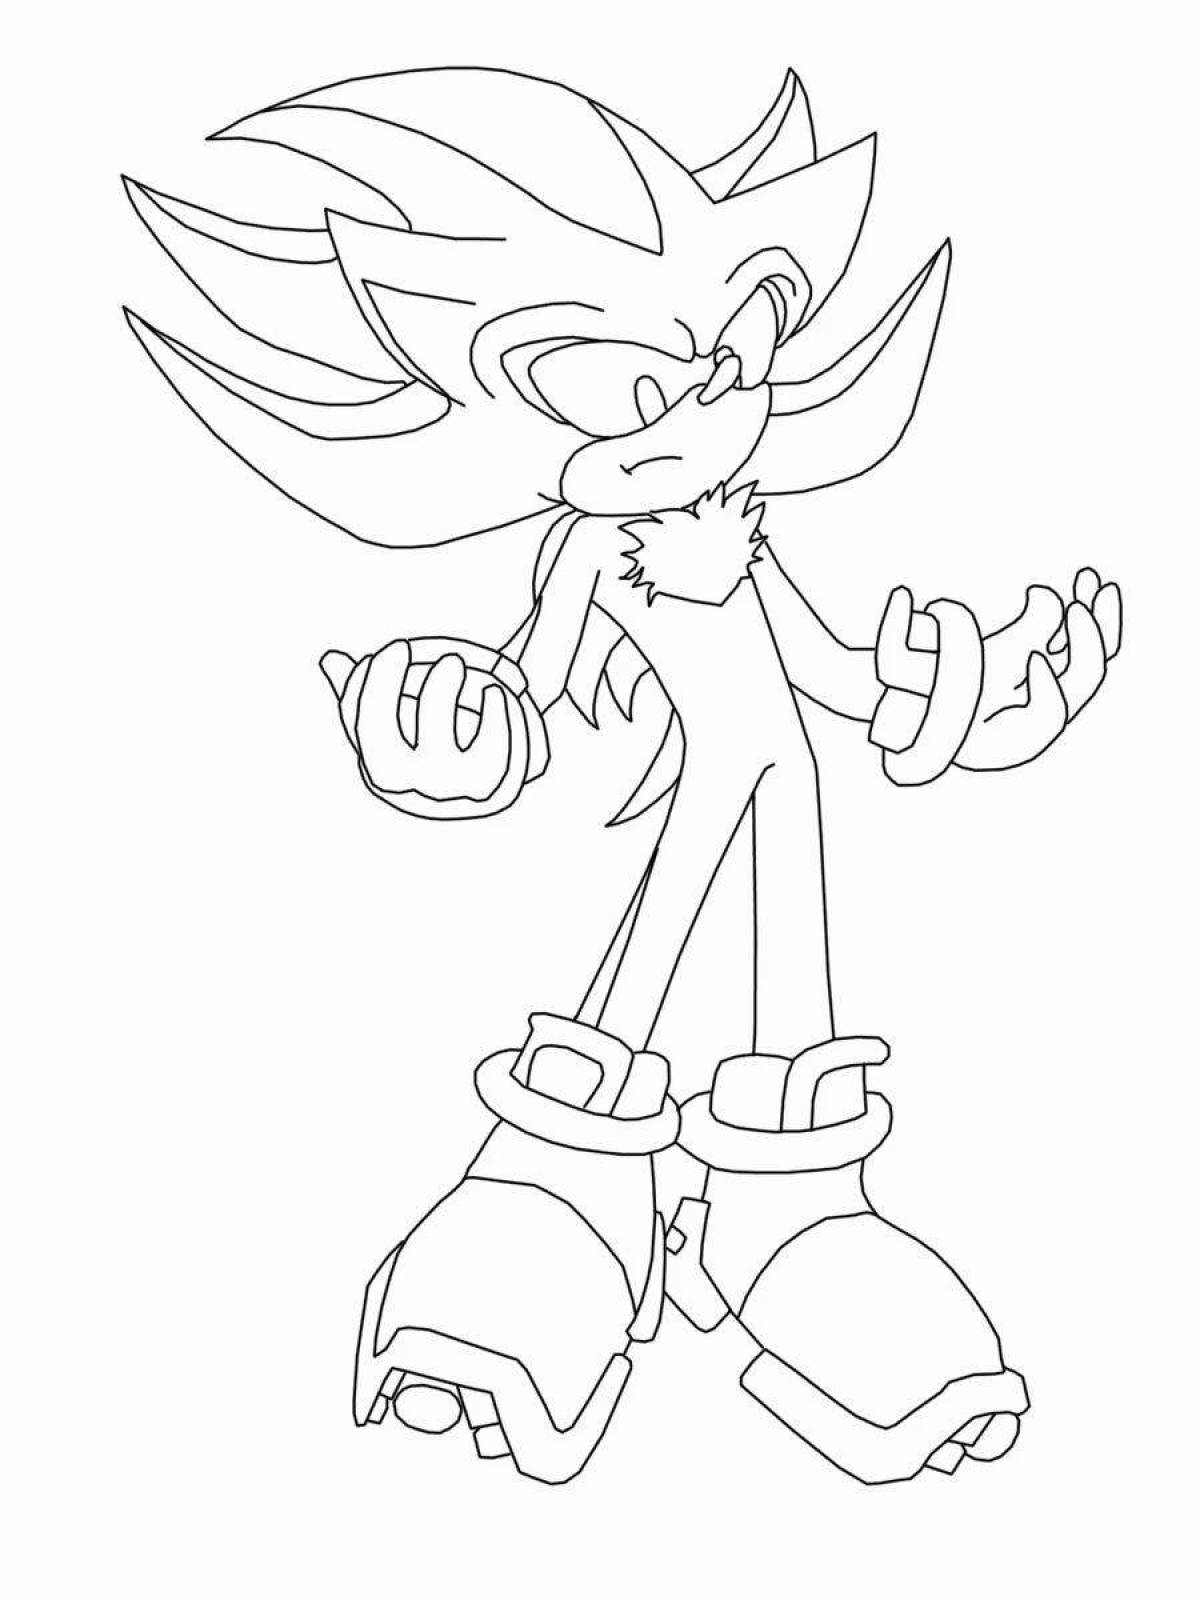 Majestic coloring page super shadow